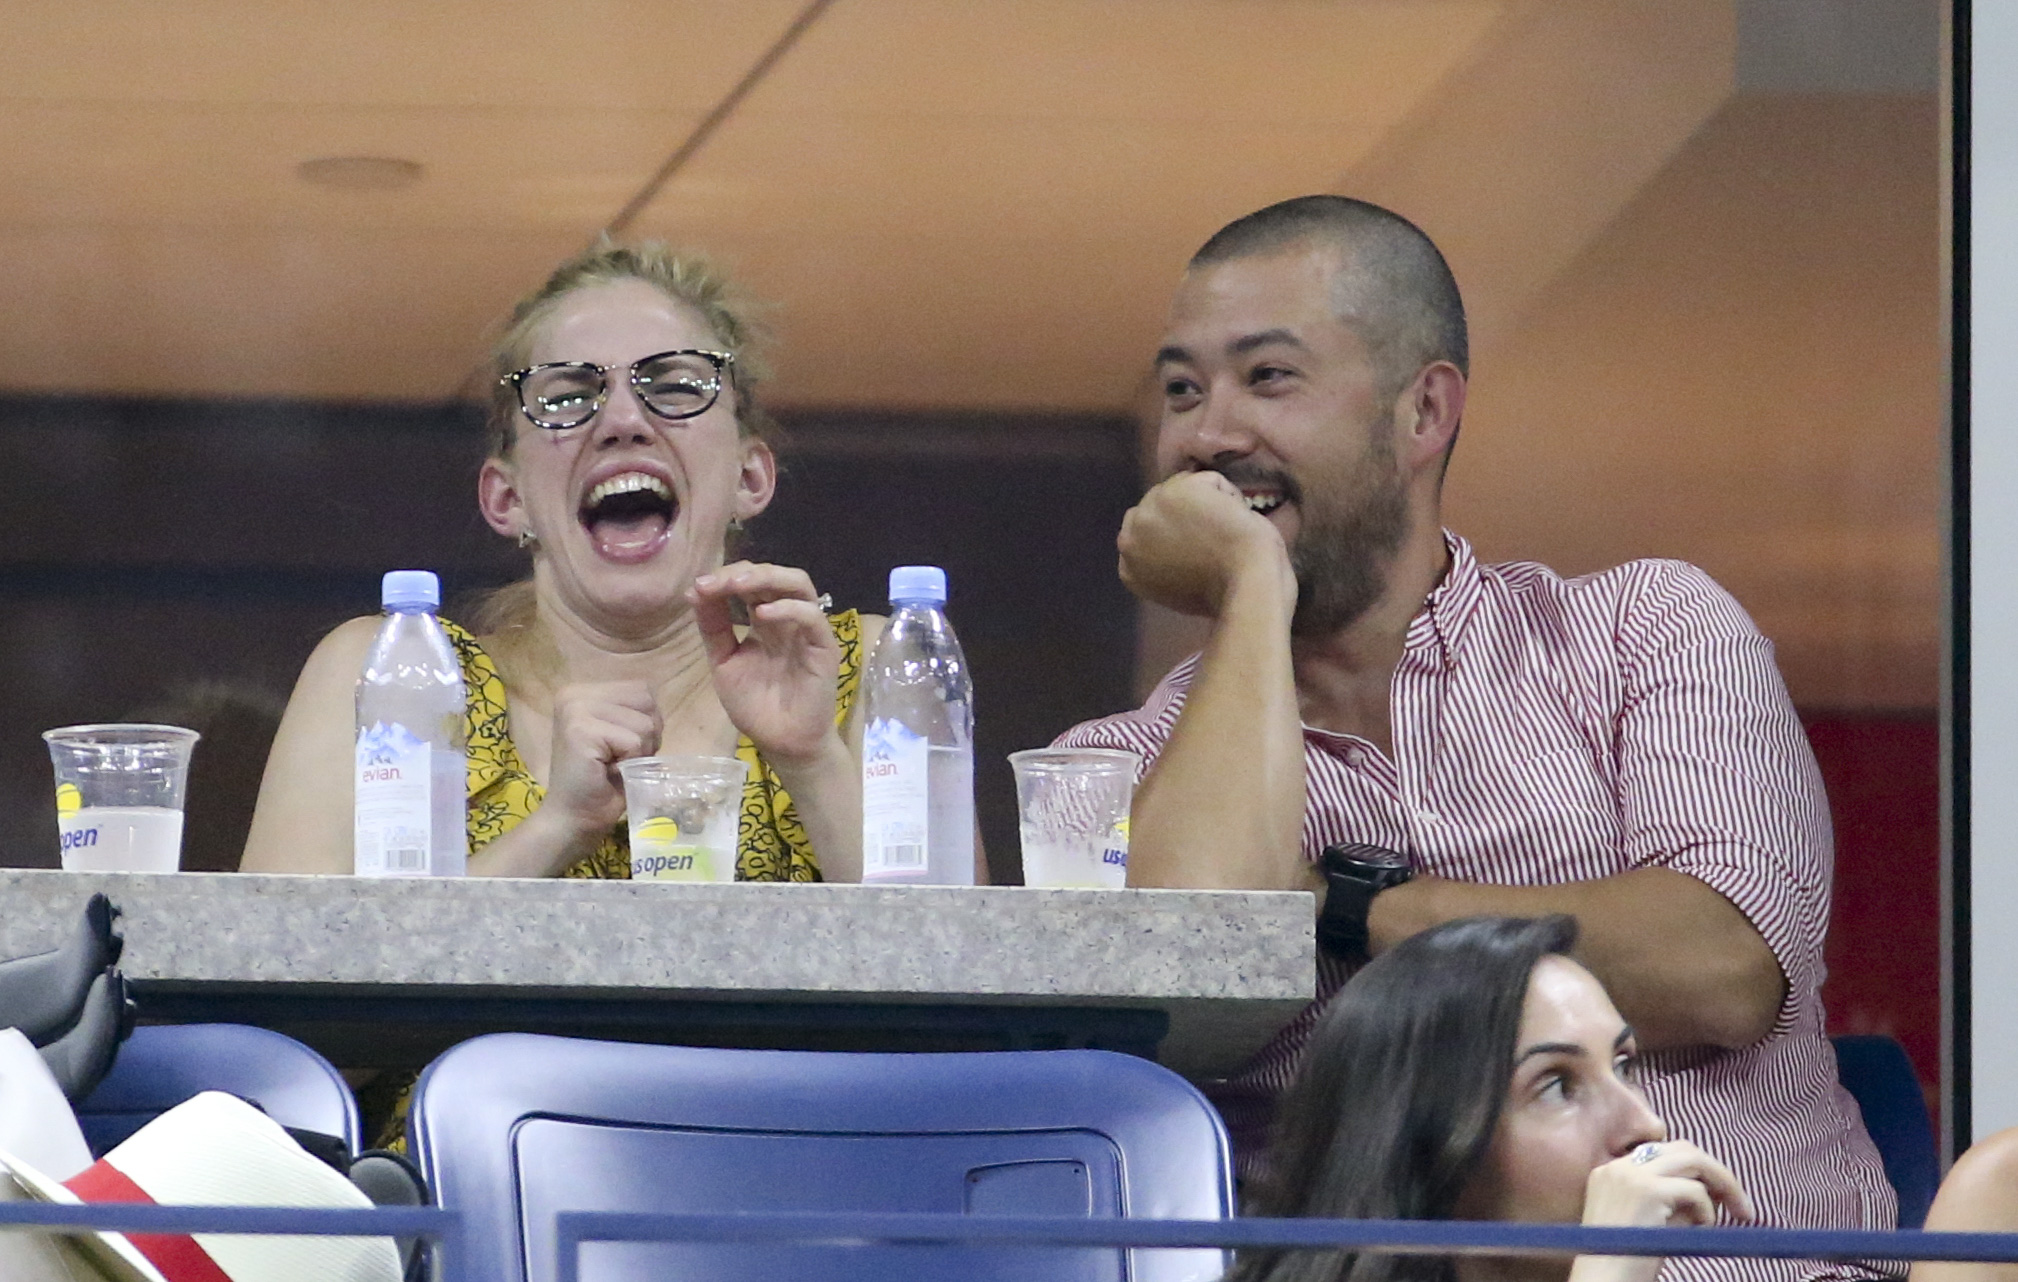 Anna Chlumsky and her husband Shaun So at the tennis US Open on September 3, 2018, in Flushing Meadows, Queens, New York City | Source: Getty Images